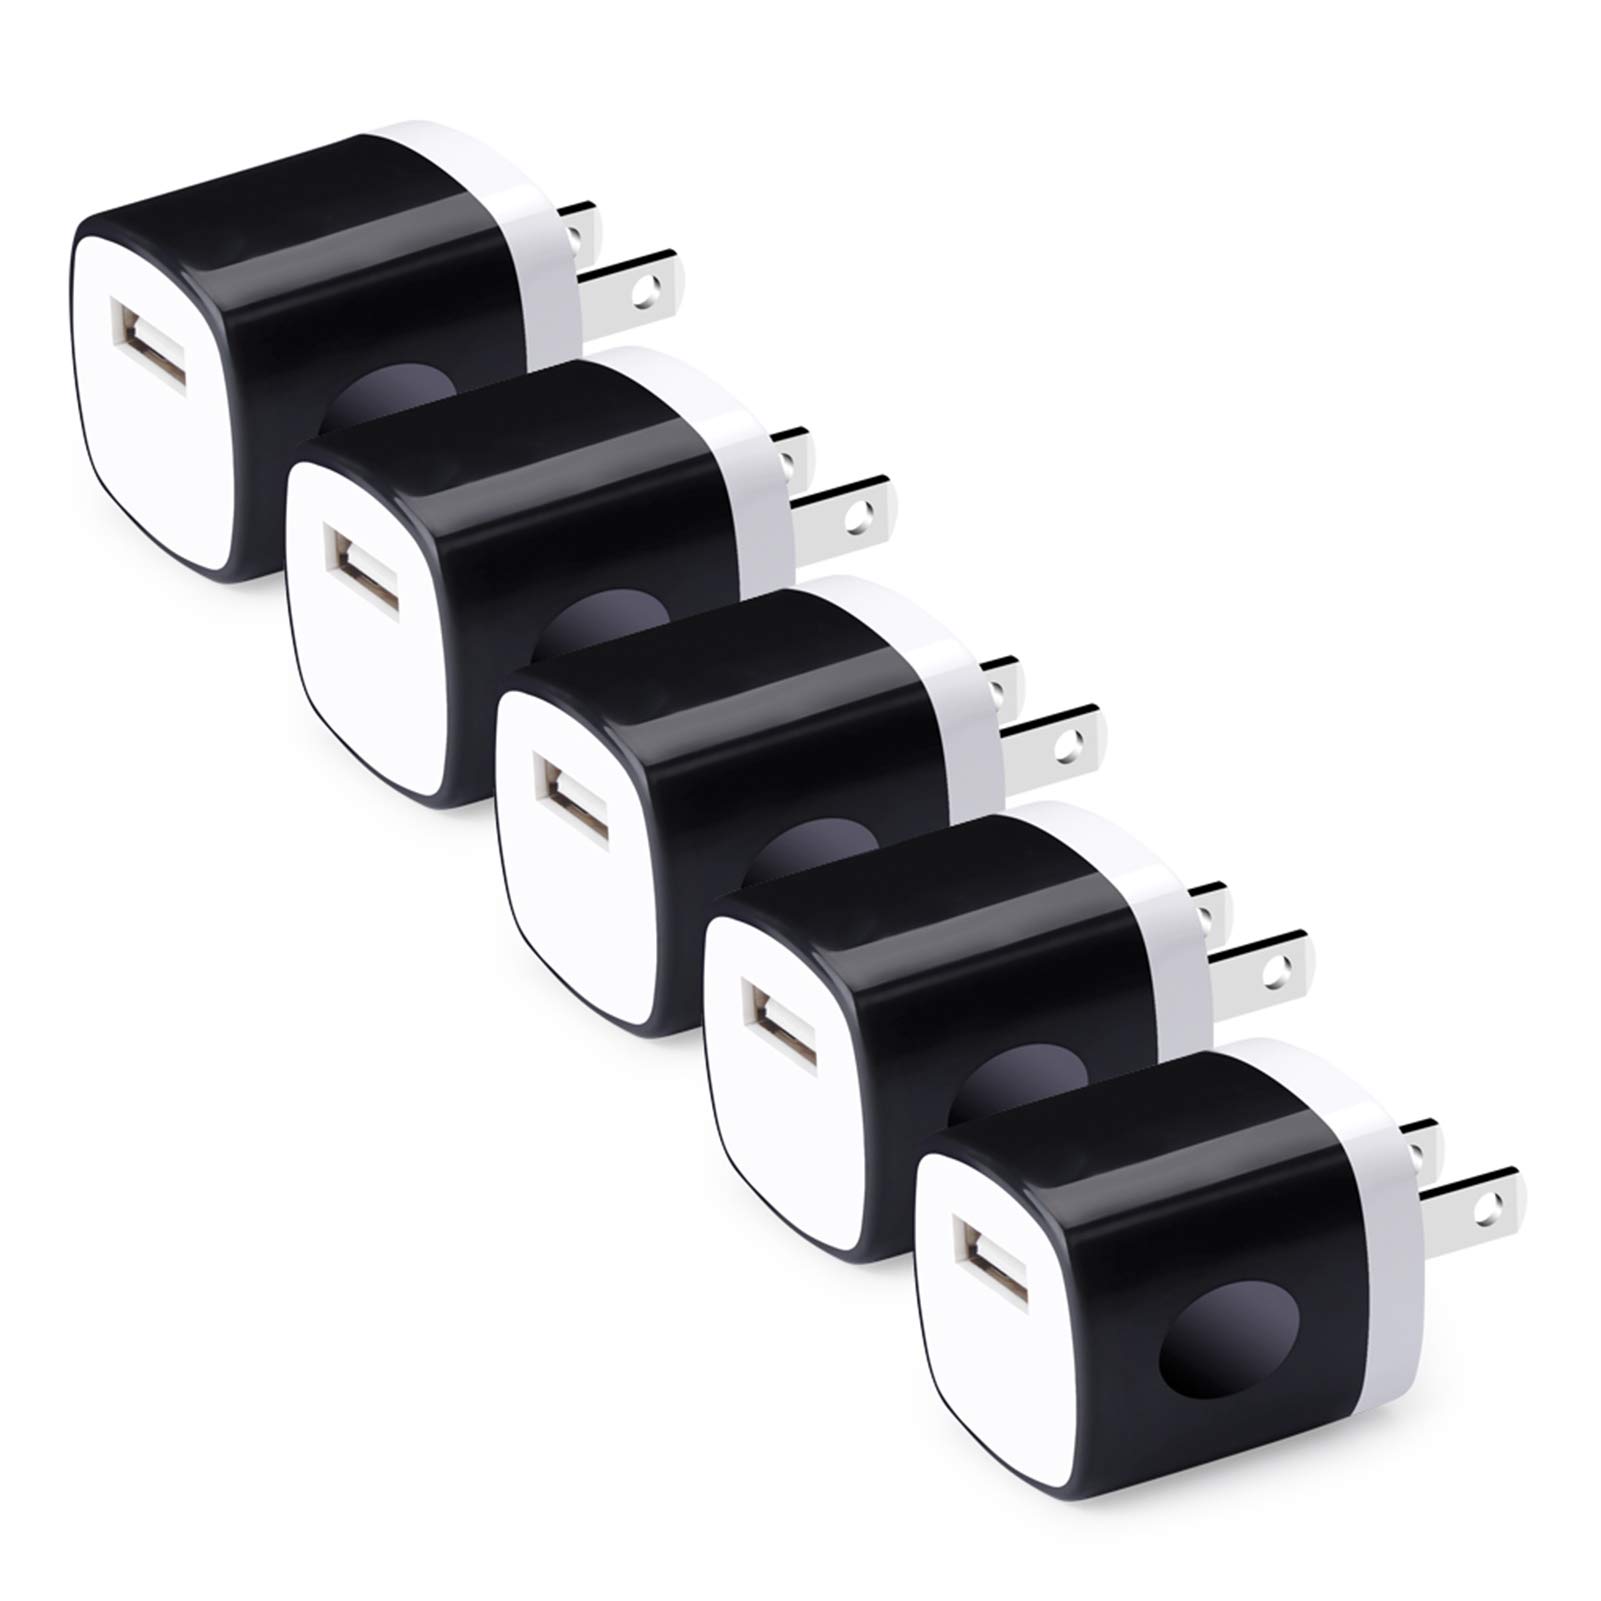 Book Cover Charger Box,5Pack 1A/5V Single Port USB Wall Charger Cube Plug Charging Block Brick for iPhone 14 Pro Max 13 12 11 XS X 8,Samsung Galaxy S23 A53 A73 A14 A13 S22 S21 S20,Pixel 7 6a,Moto G9 G8,LG Stylo black 5pack